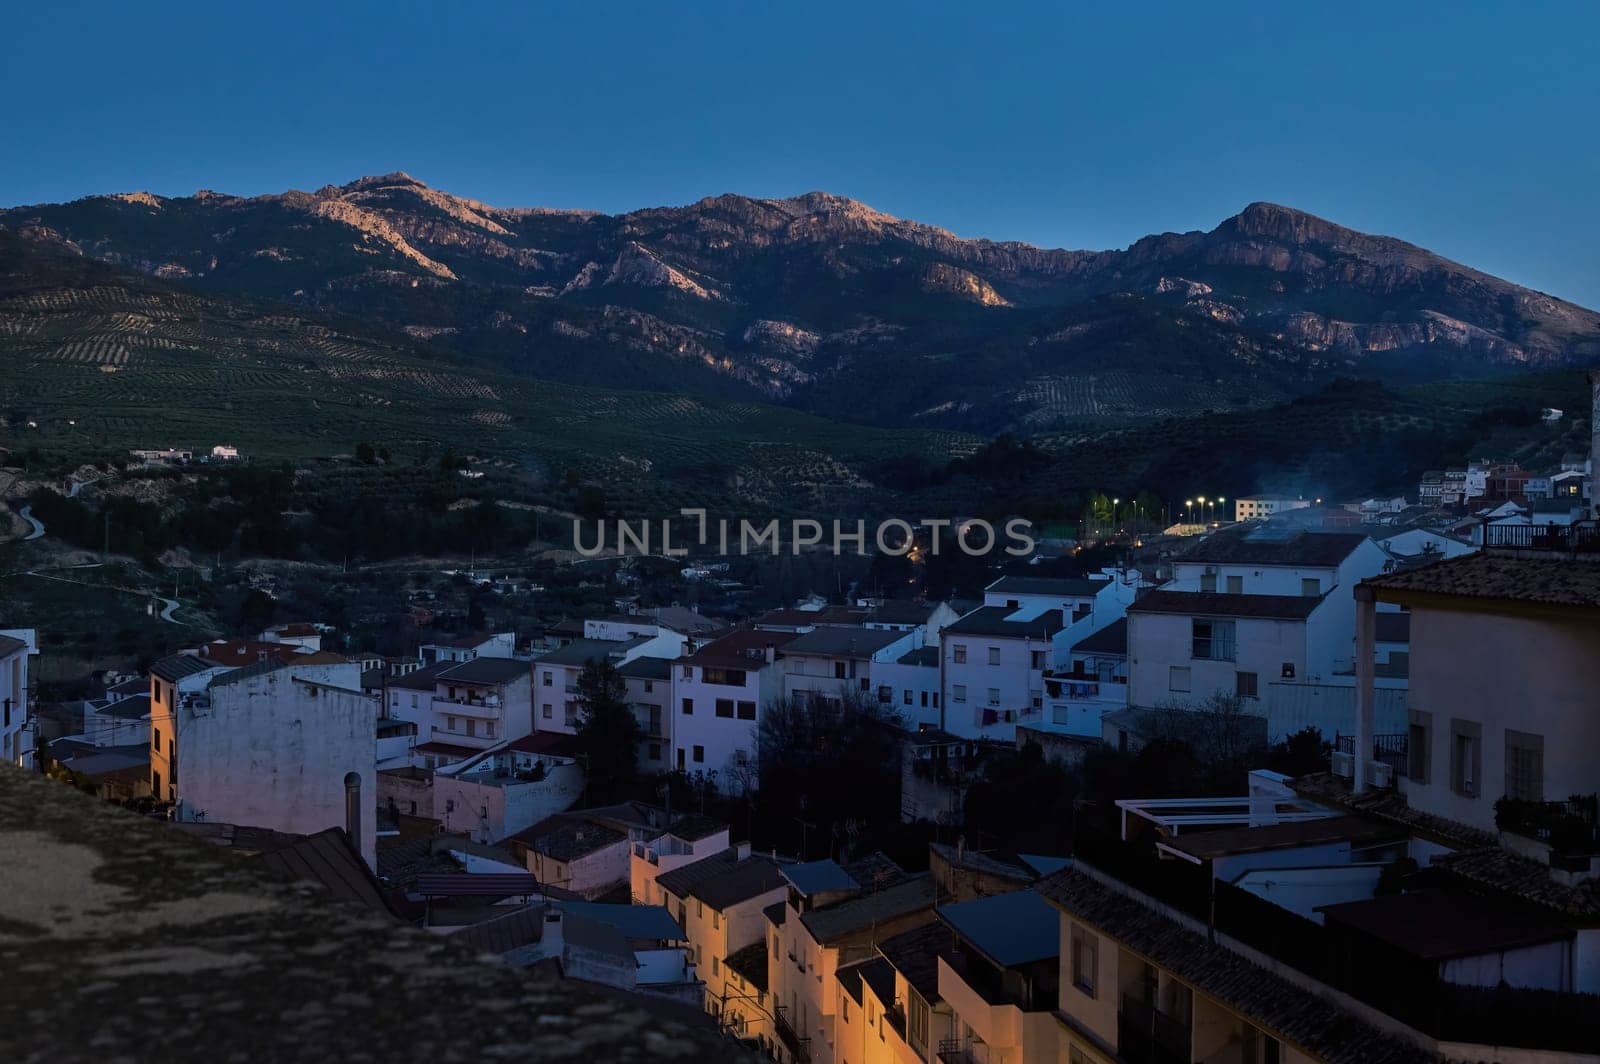 Sierra de Cazorla. Quesada. Jaen. Andalusia. Spain. Beautiful mountains at evening and white buildings on the foreground.